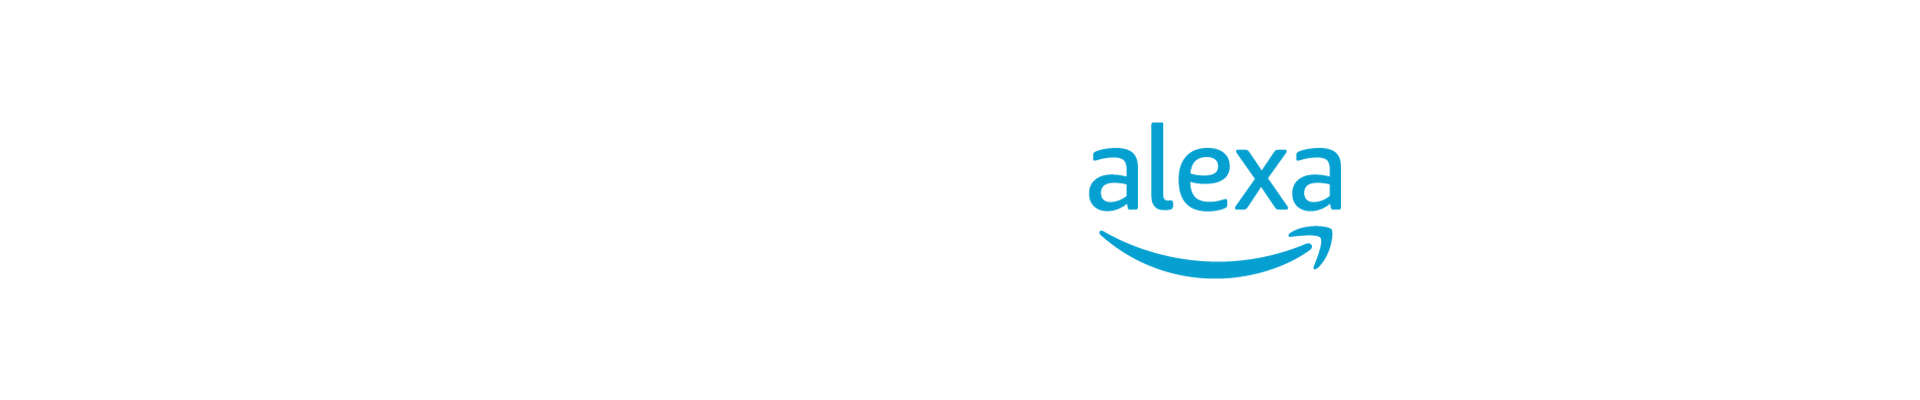 Argus Cyber Security Approved as Authorized Security Lab for Amazon Alexa Auto Integration